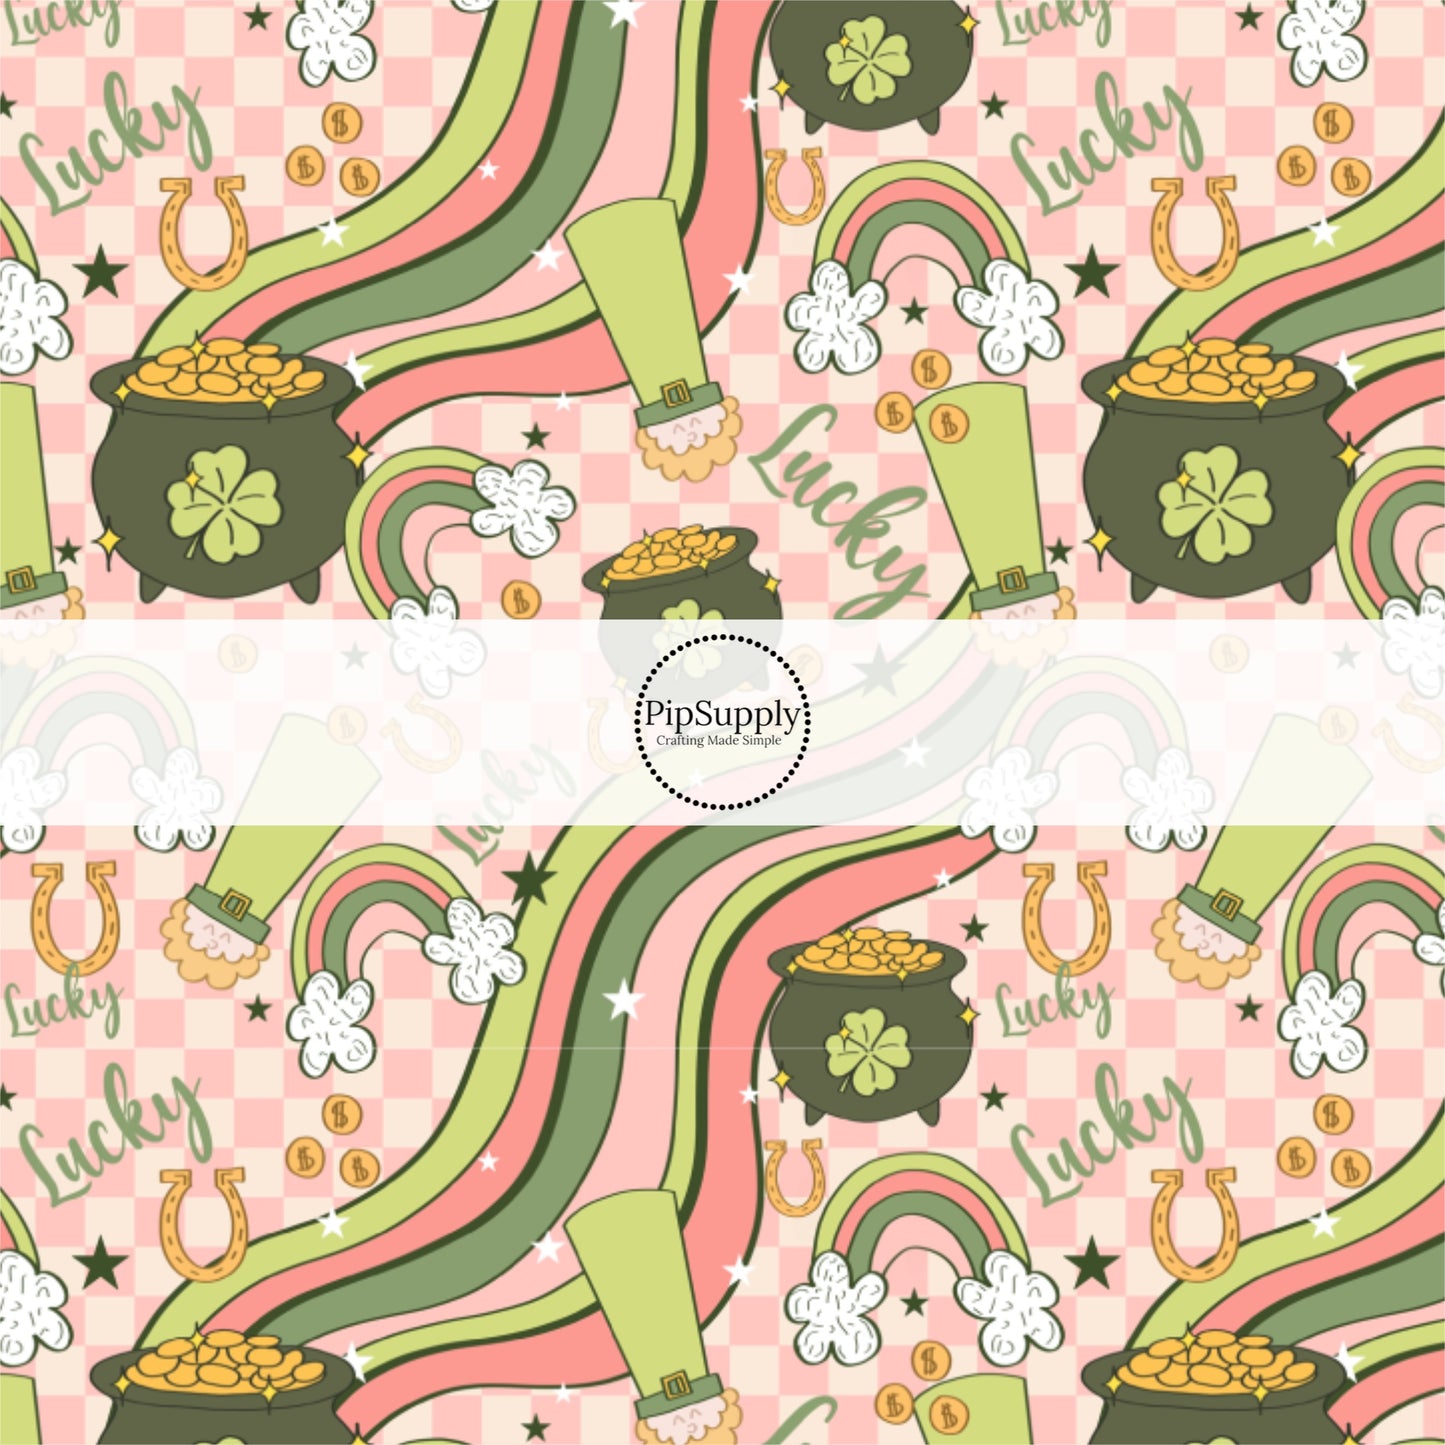 Pots of Gold, the Phrase "Lucky", Rainbows, and Gold Coins on Pink Checkered Fabric by the Yard